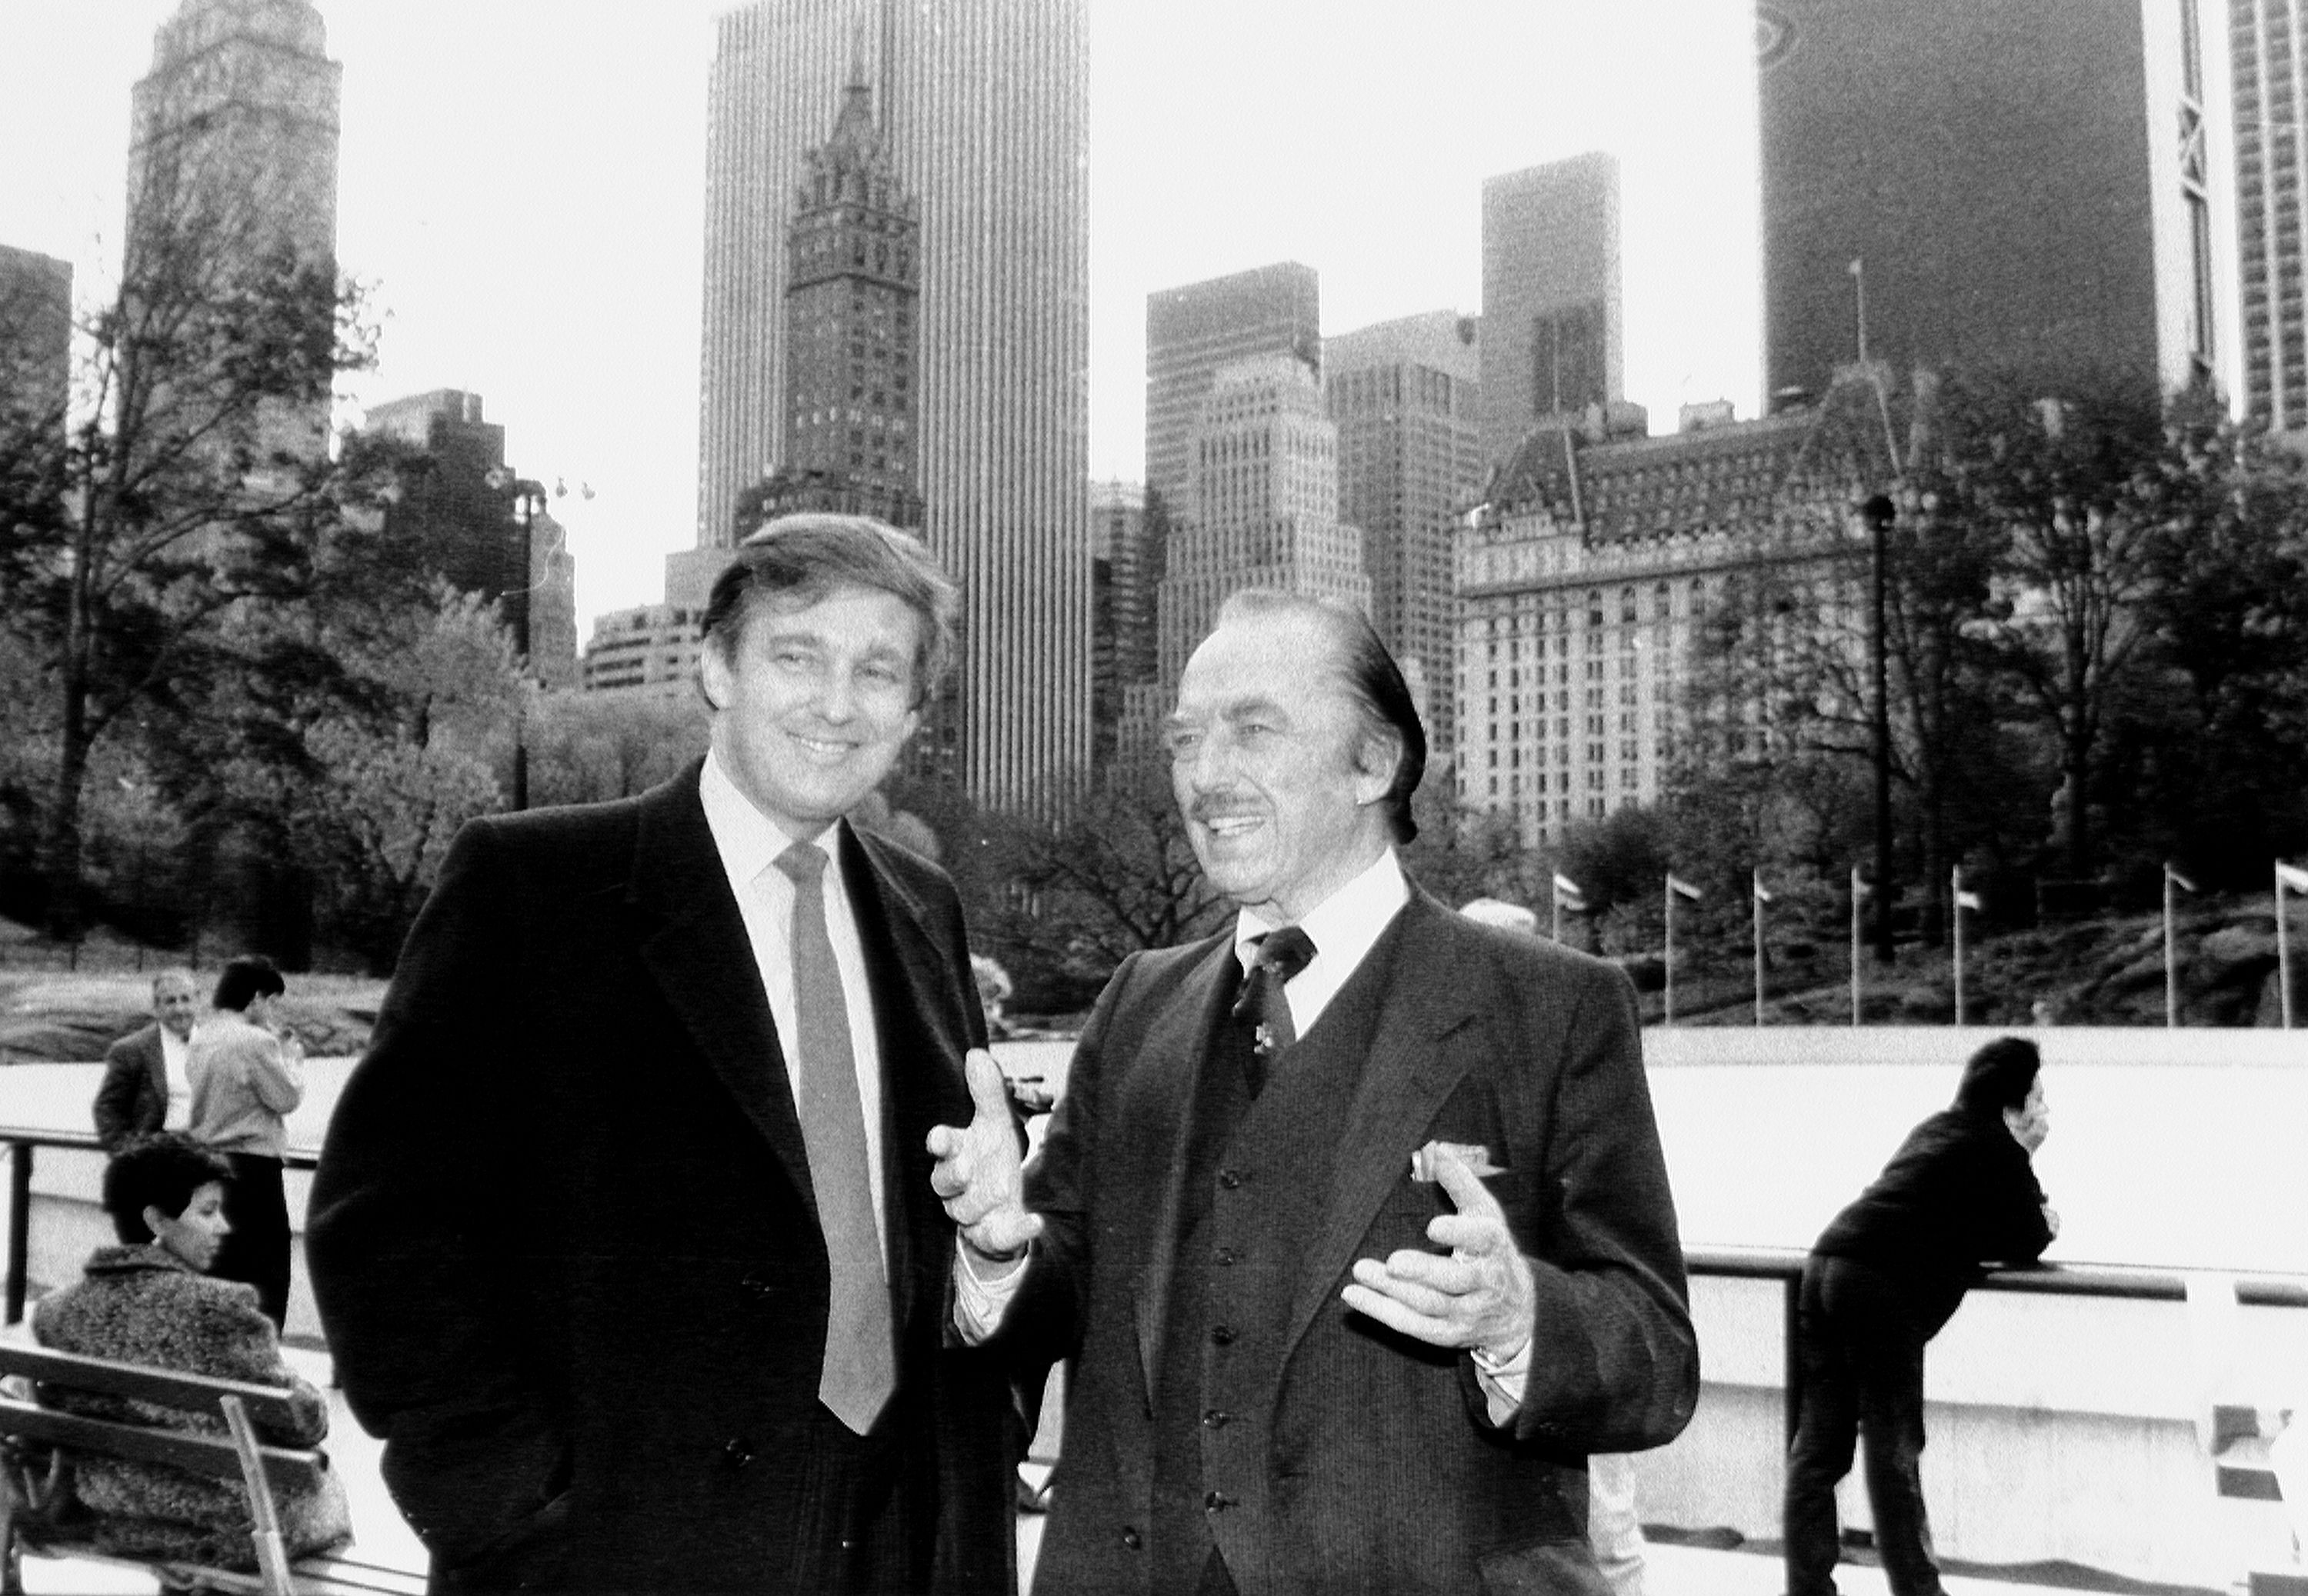 Donald and Fred Trump at Central Park in New York circa the 1980s | Source: Getty Images